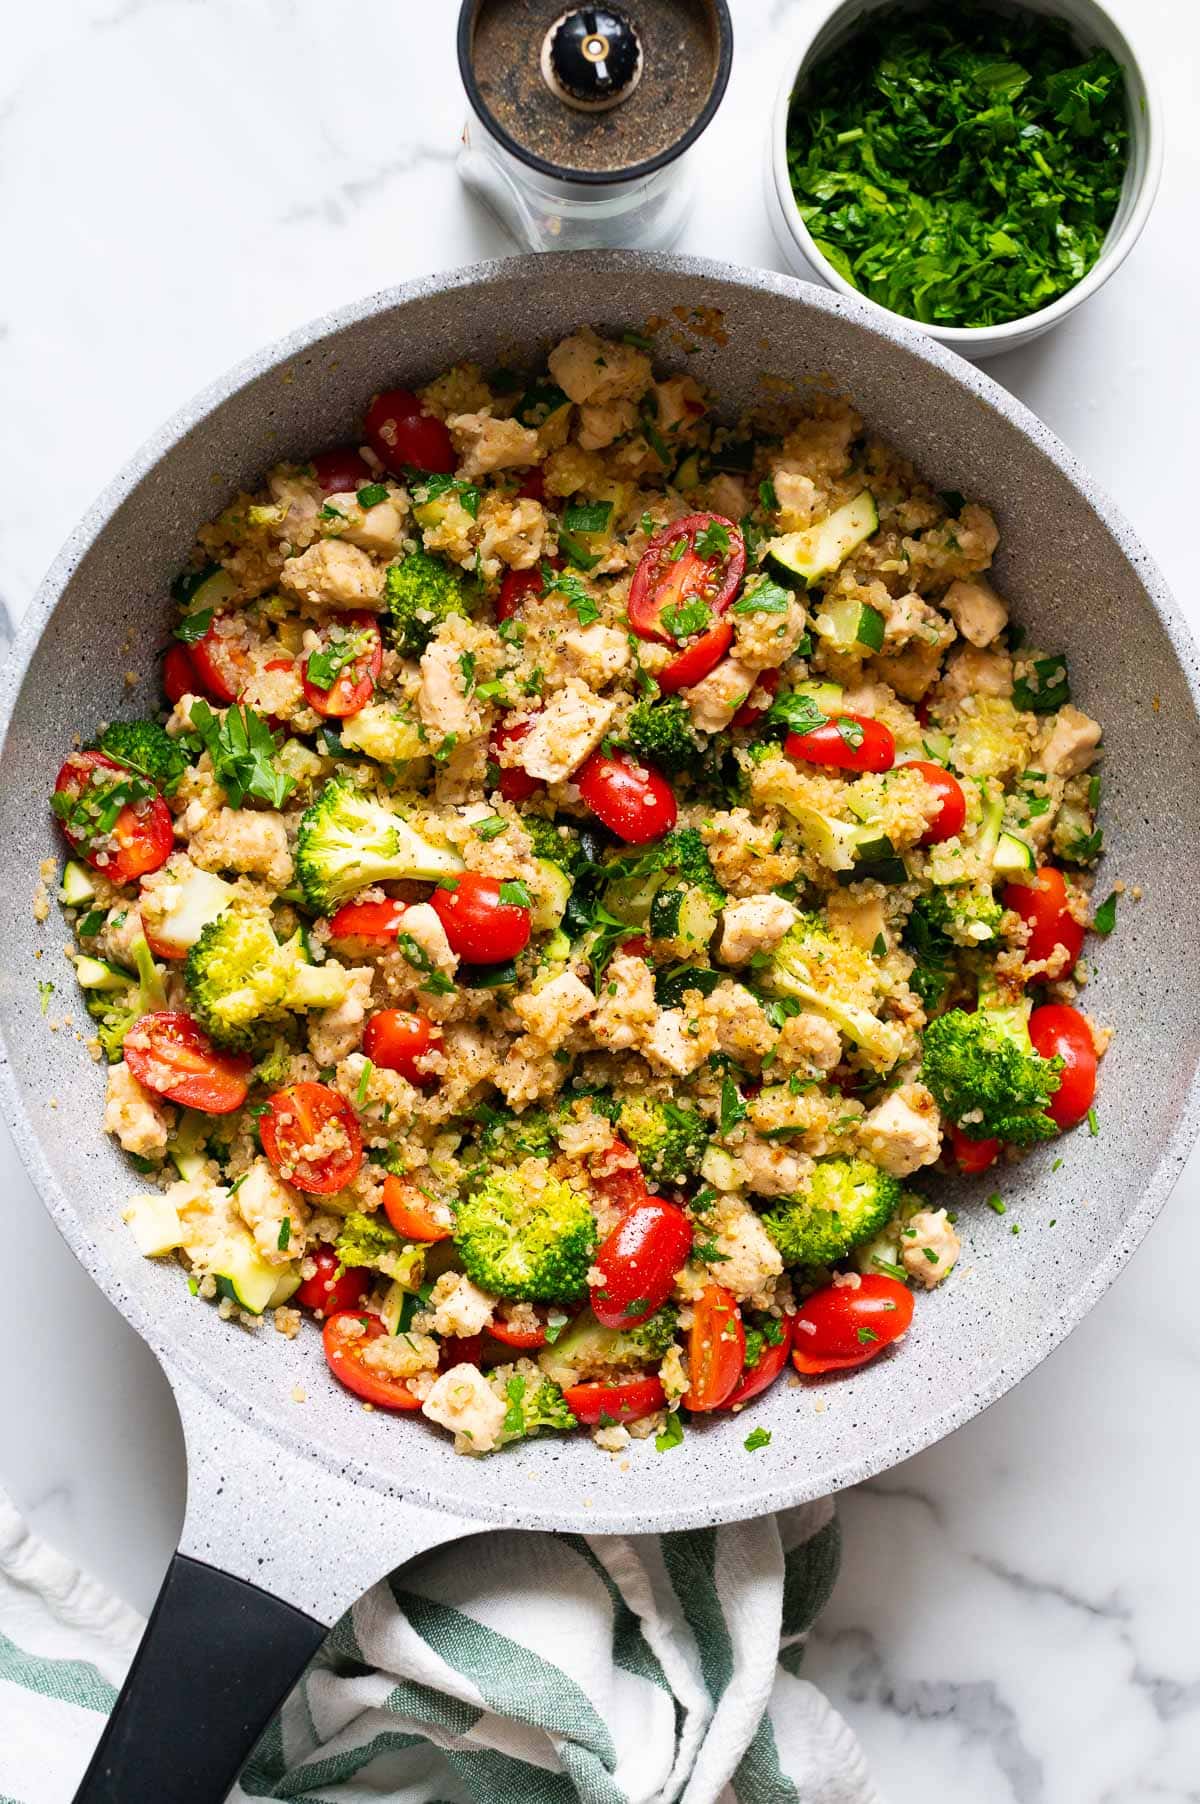 Chicken quinoa skillet with tomatoes and broccoli.